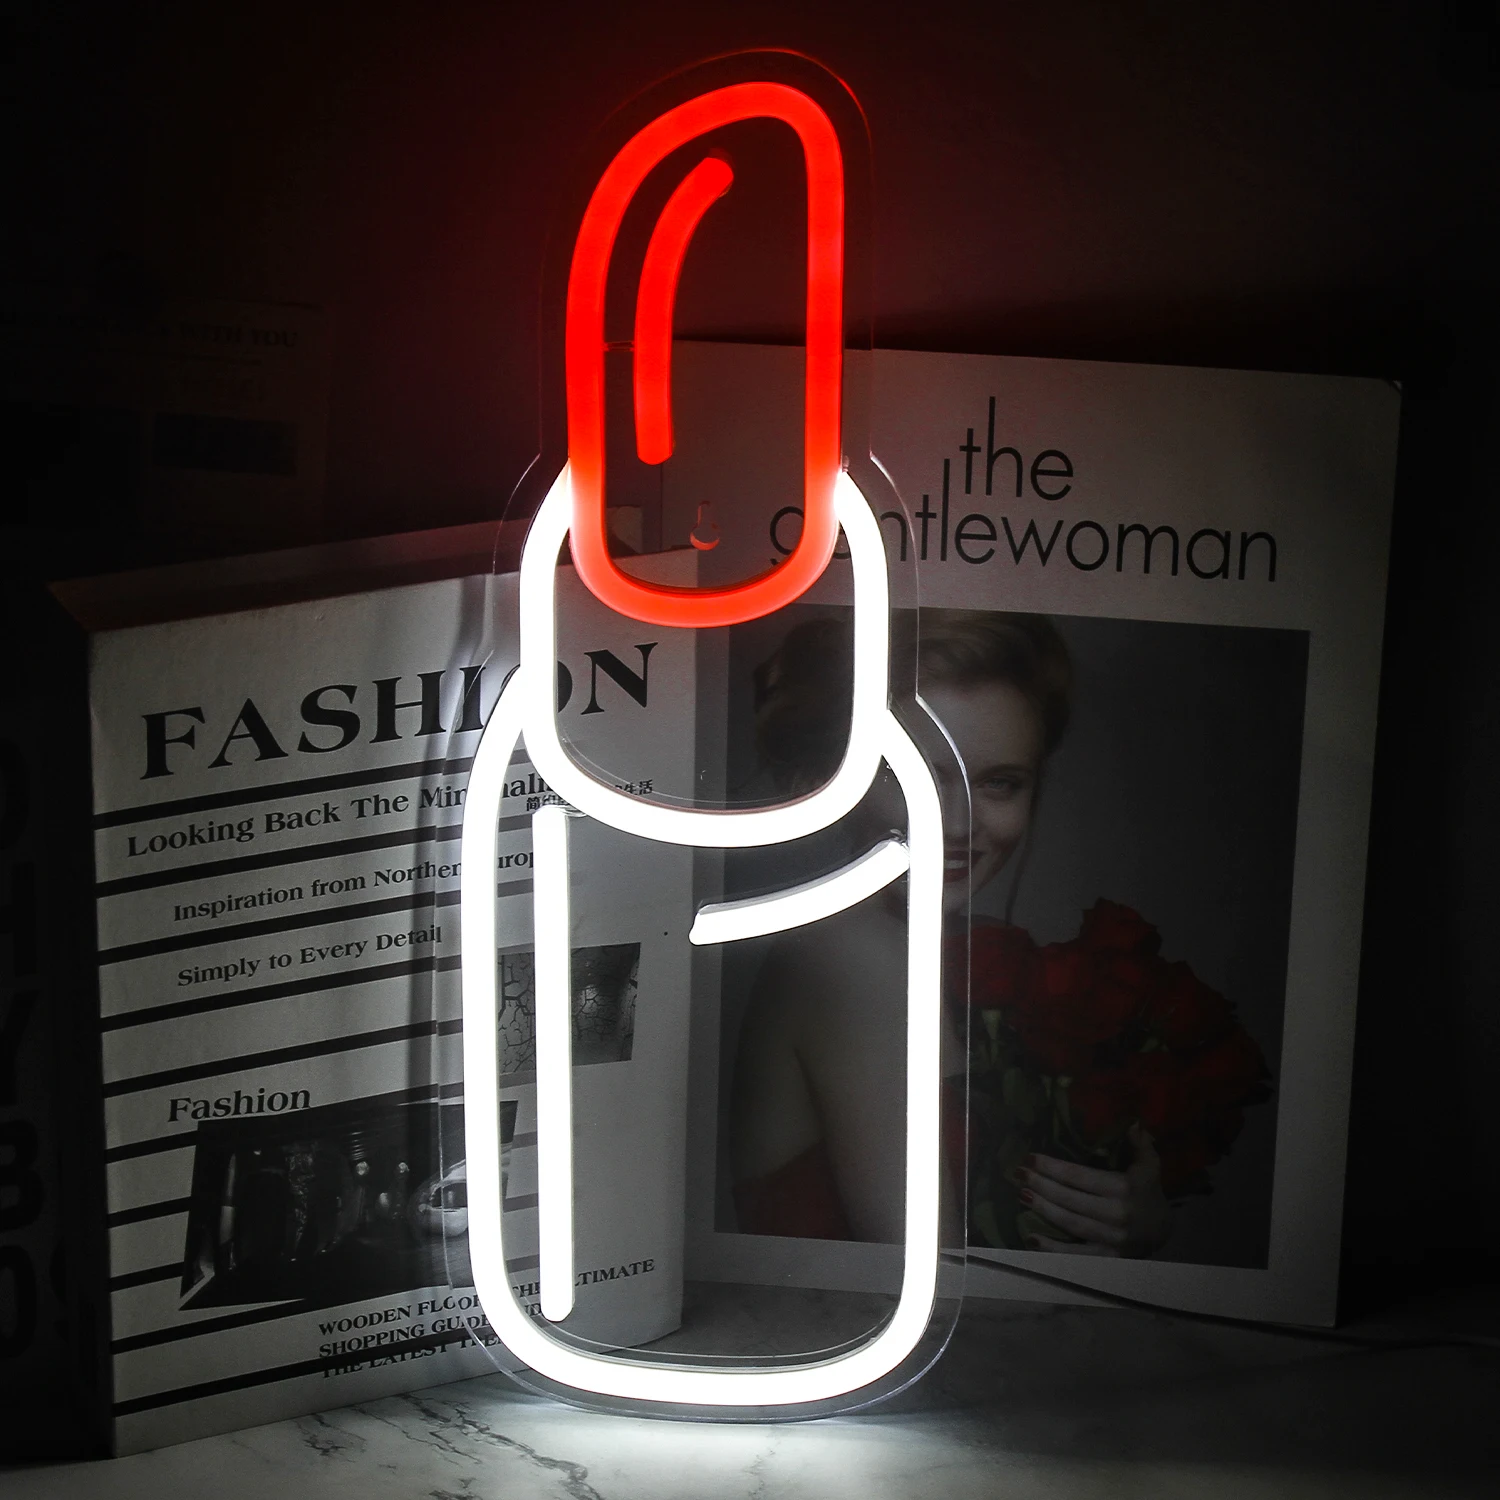 ineonlife Neon Light Lipstick Luminous LED Sign powder Room Party Wedding Shop Room Decor Mural personality Wall Decoration